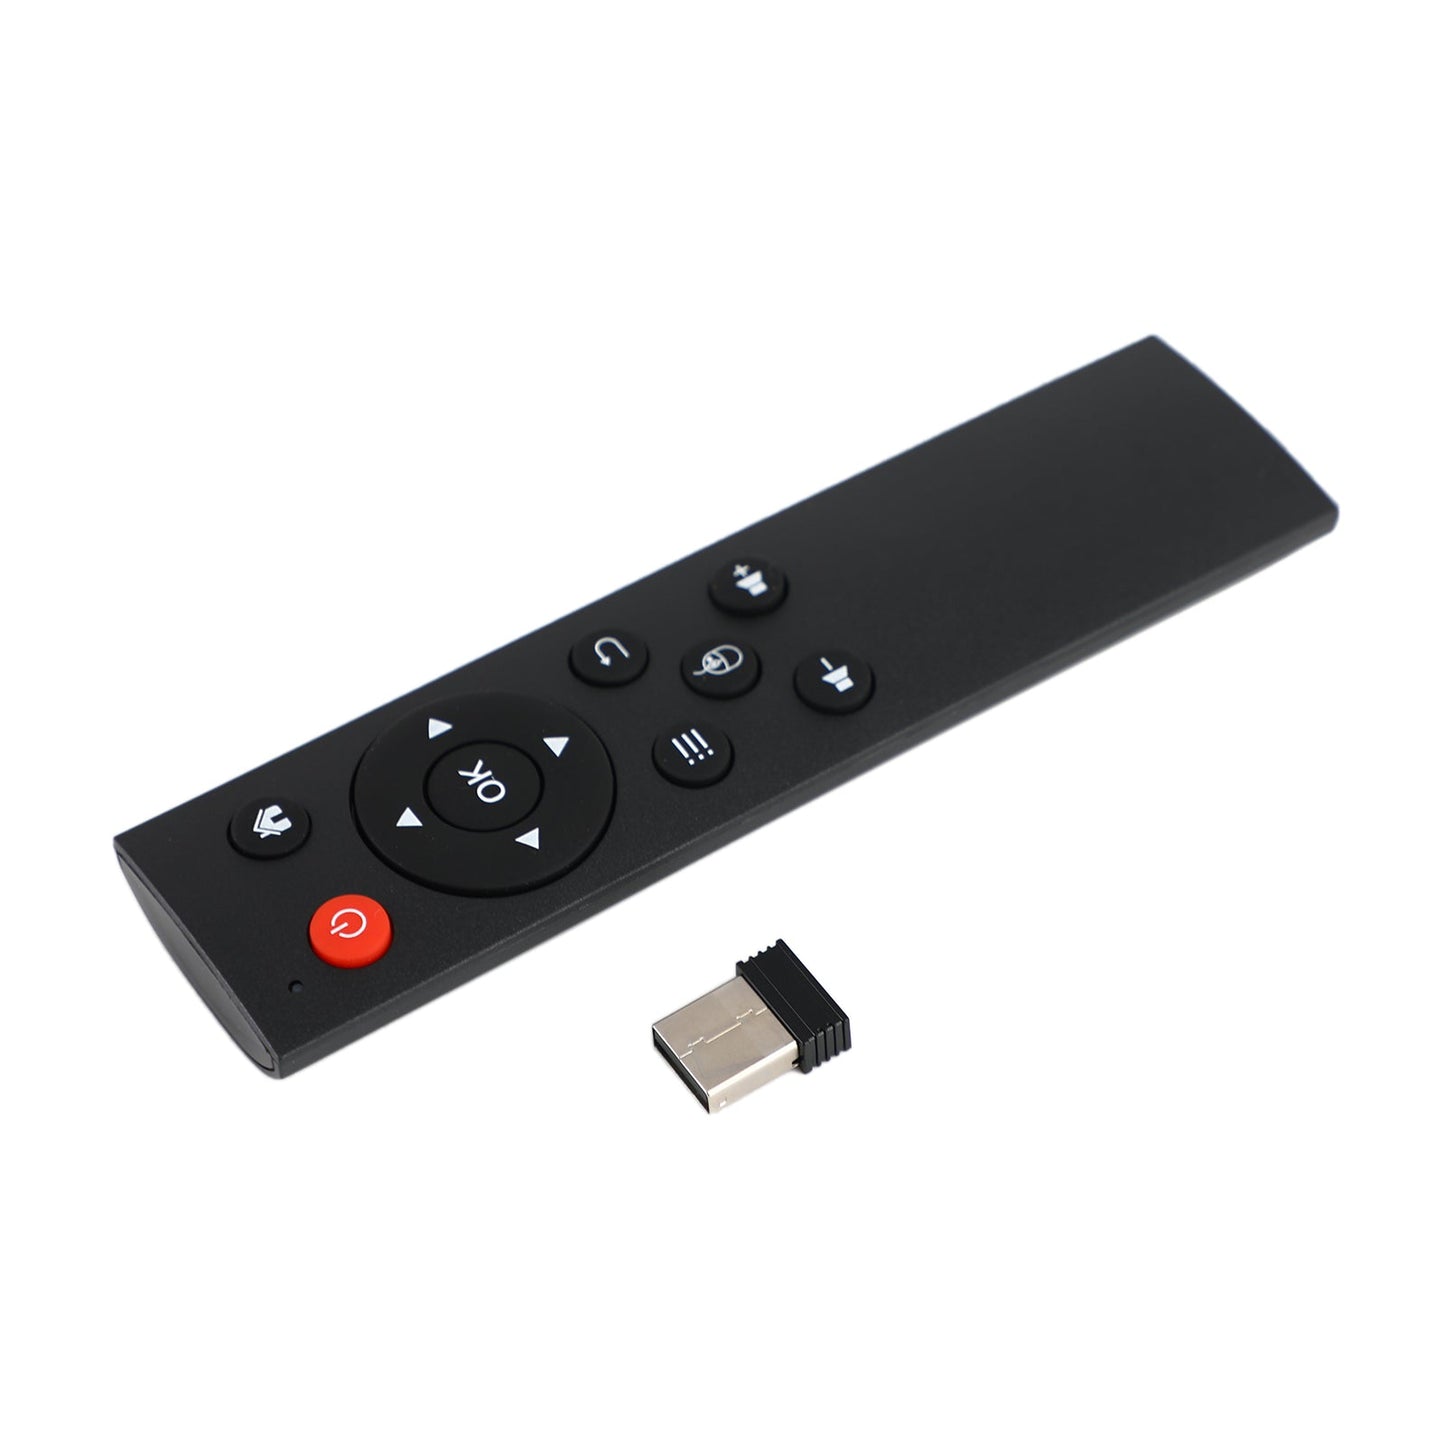 2.4G USB Mini Air Mouse Wireless Keyboard Remote Control For HTPC Smart TV Box